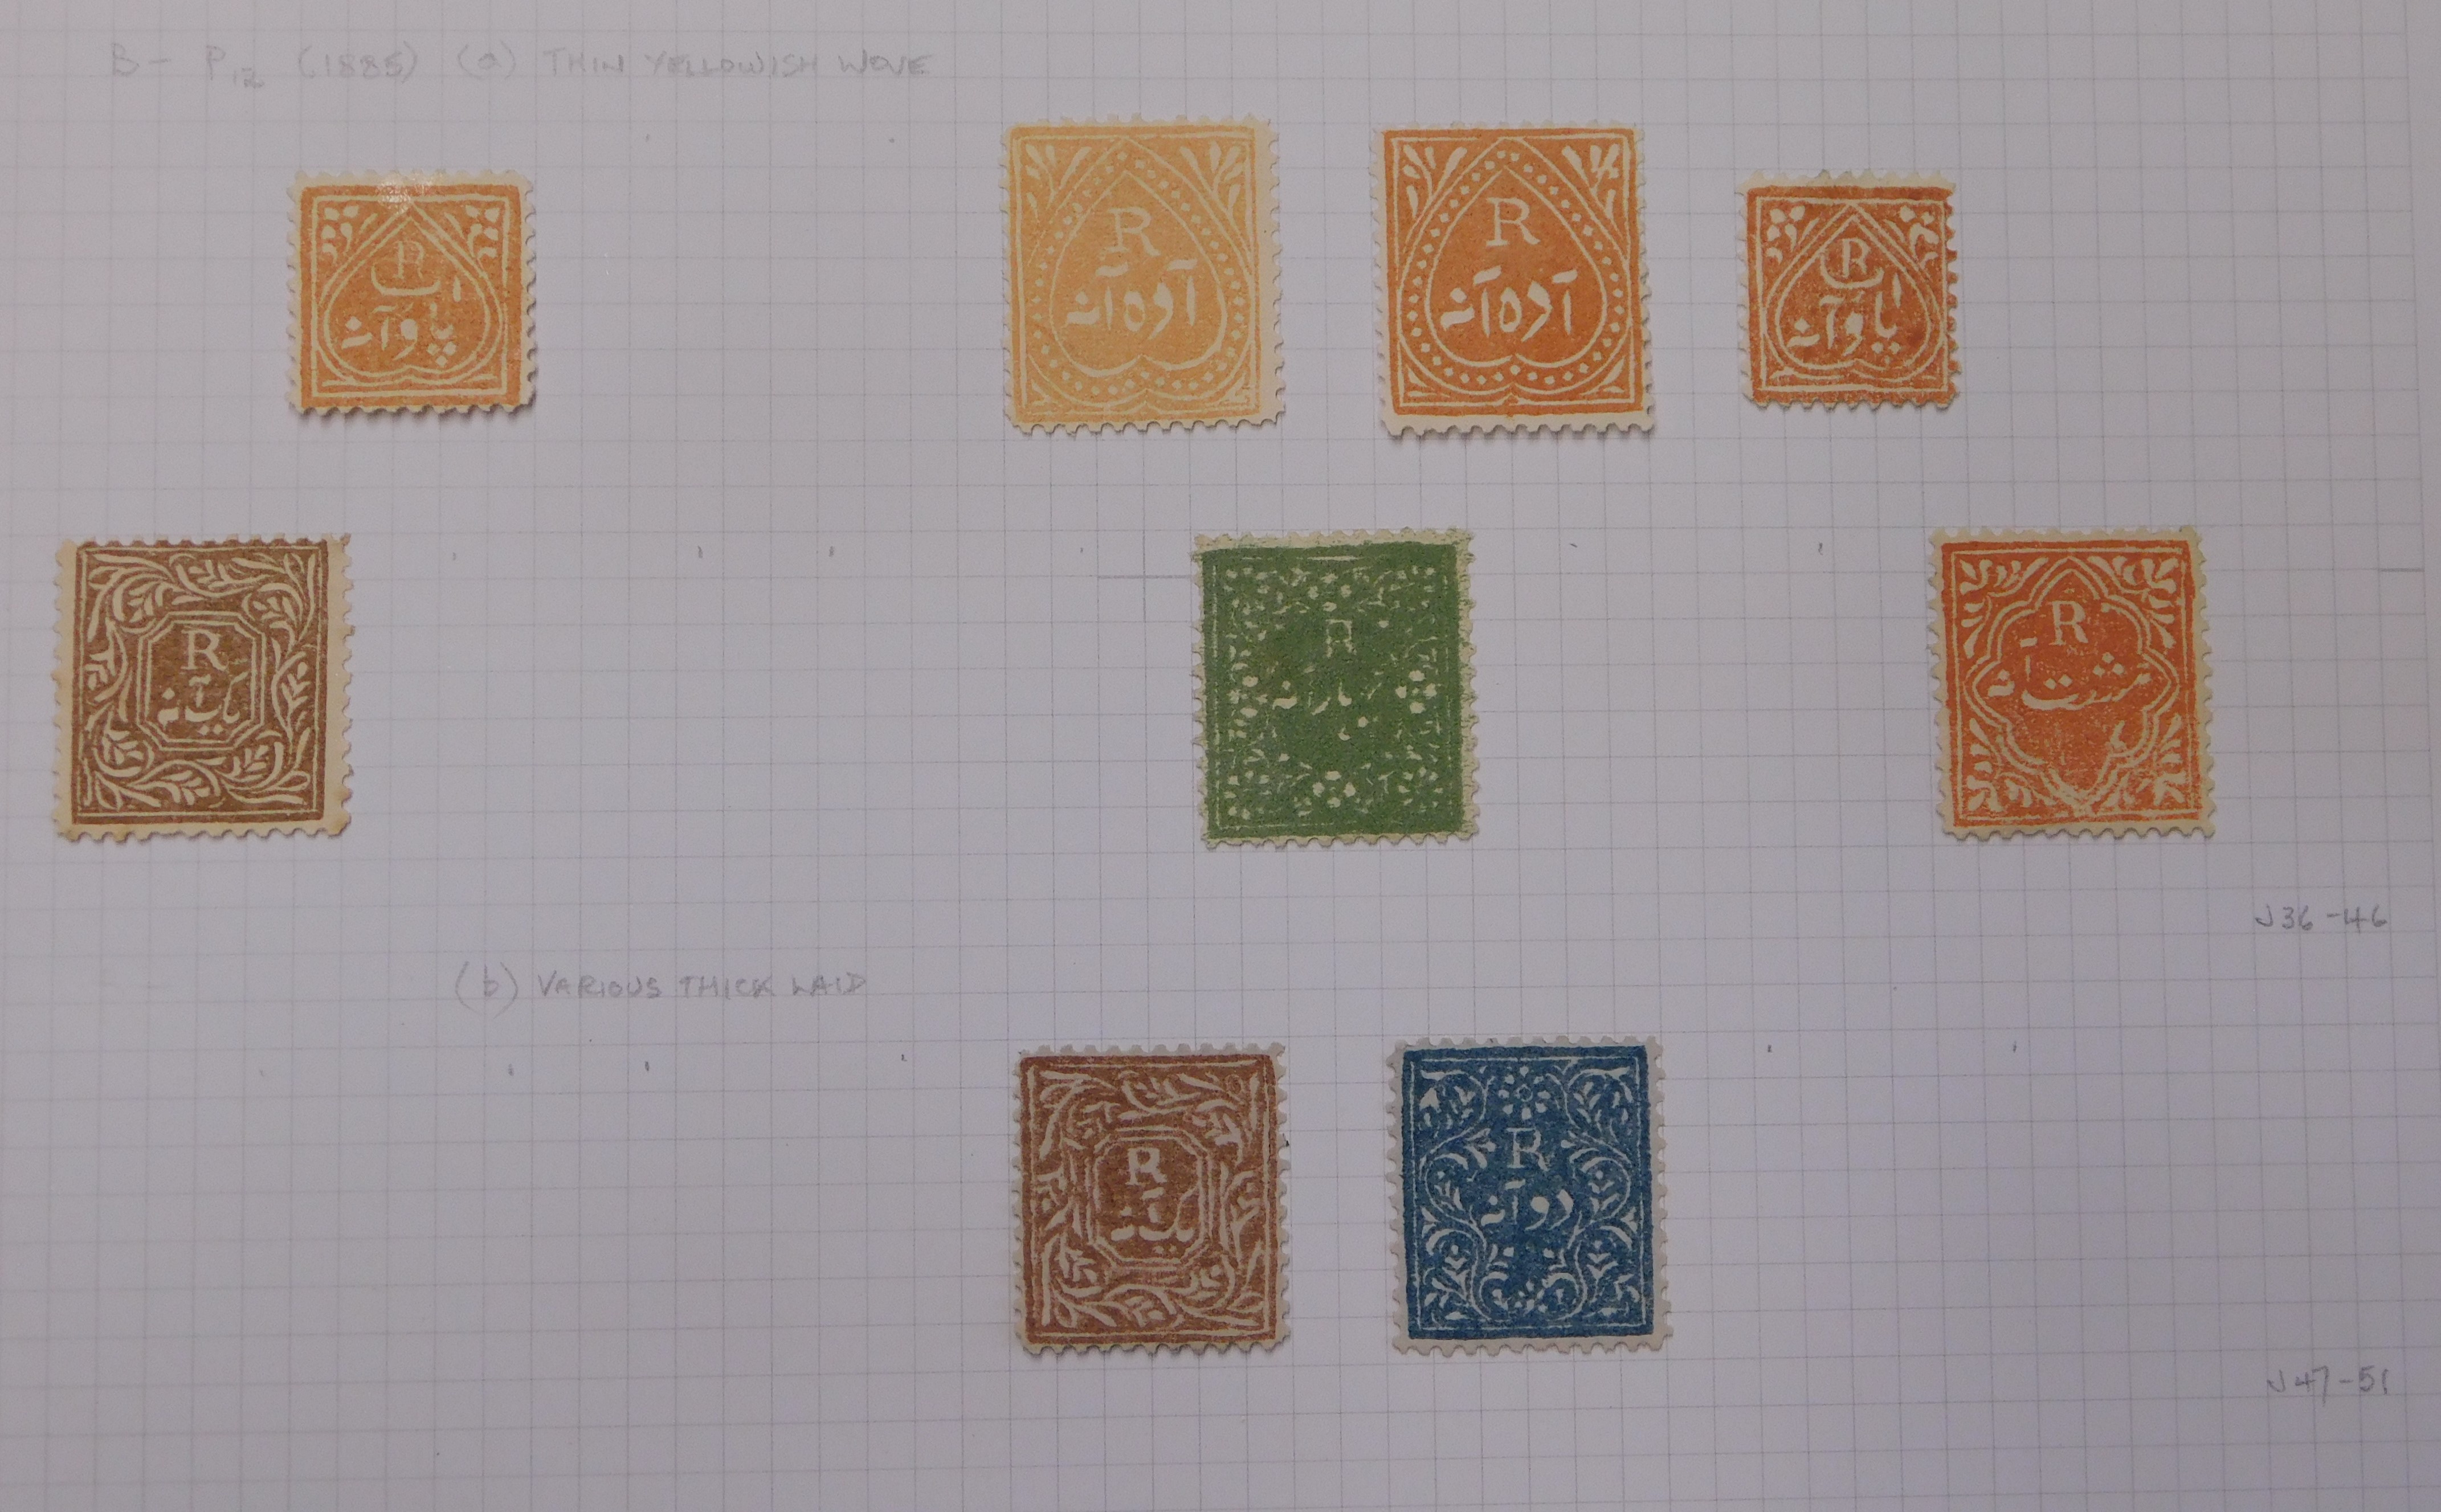 India (Jind) 1882-1885 nice m/mint ranges on various papers (14) - Image 5 of 5